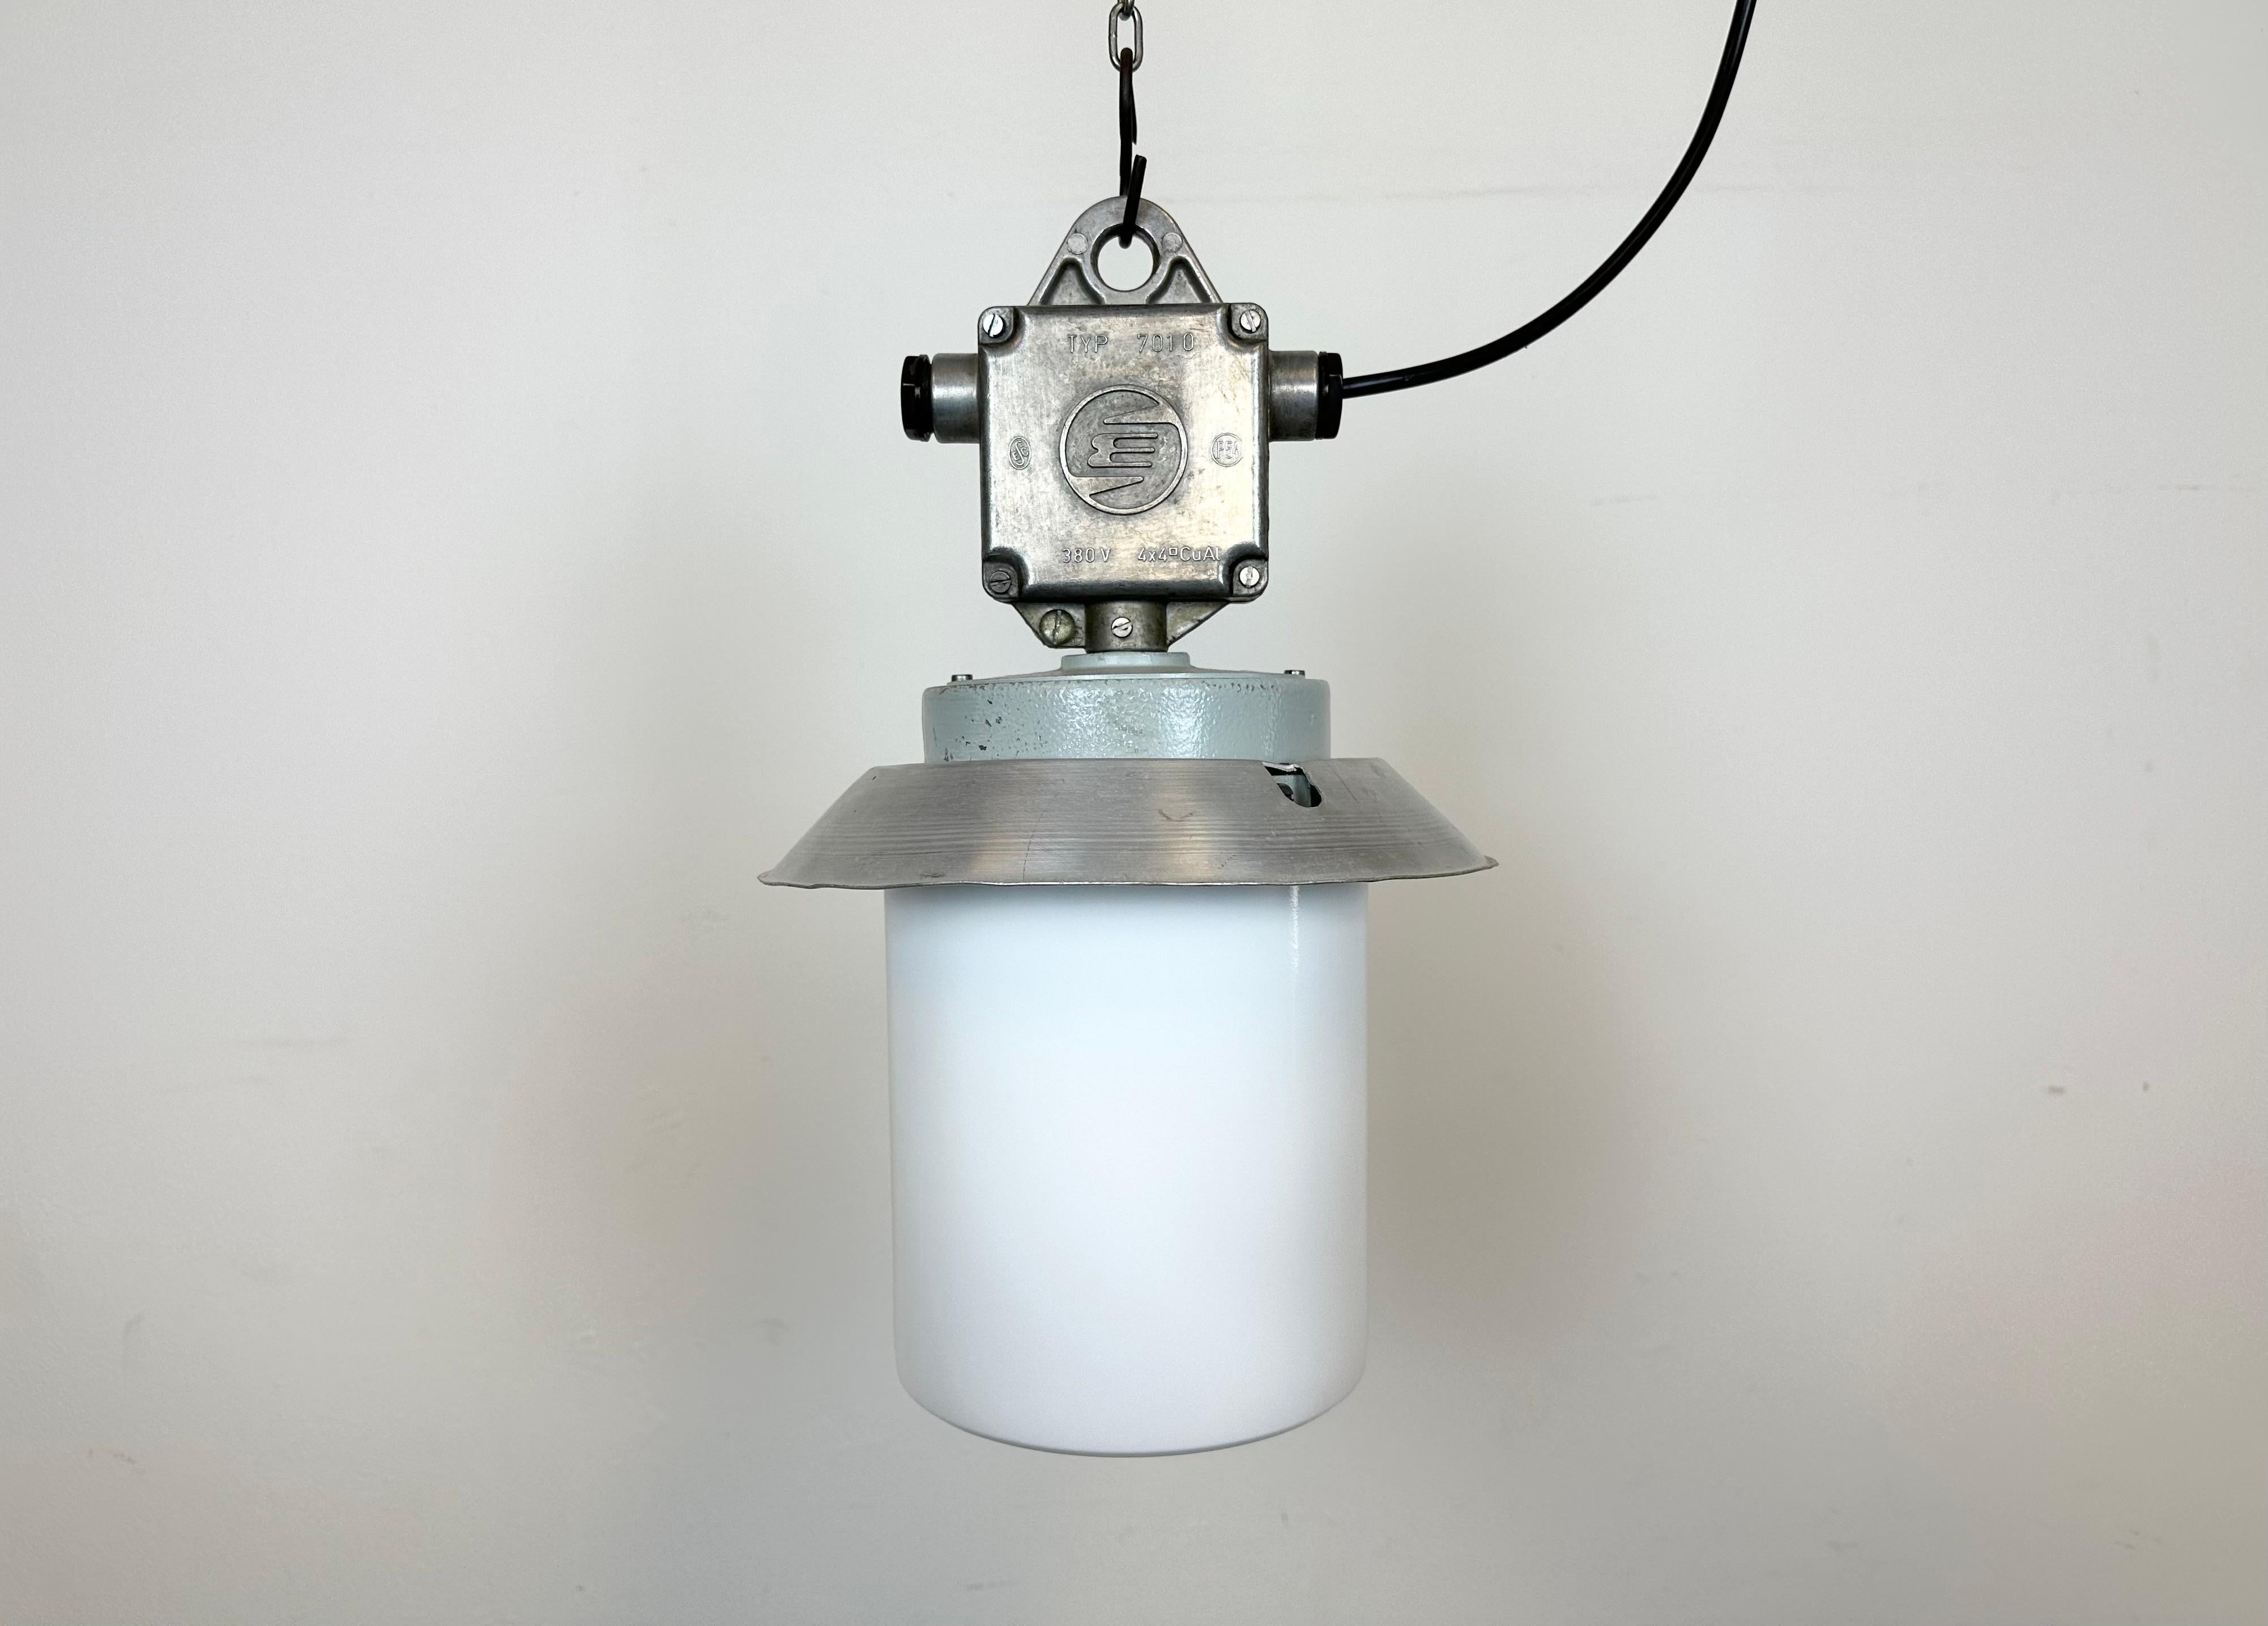 This Industrial hanging light was made by Elektrosvit in former Czechoslovakia during the 1970s. It features a cast aluminium top, an aluminium shade and a clear glass cover. New porcelain socket requires standard E 27/ E26 light bulbs. New wire.